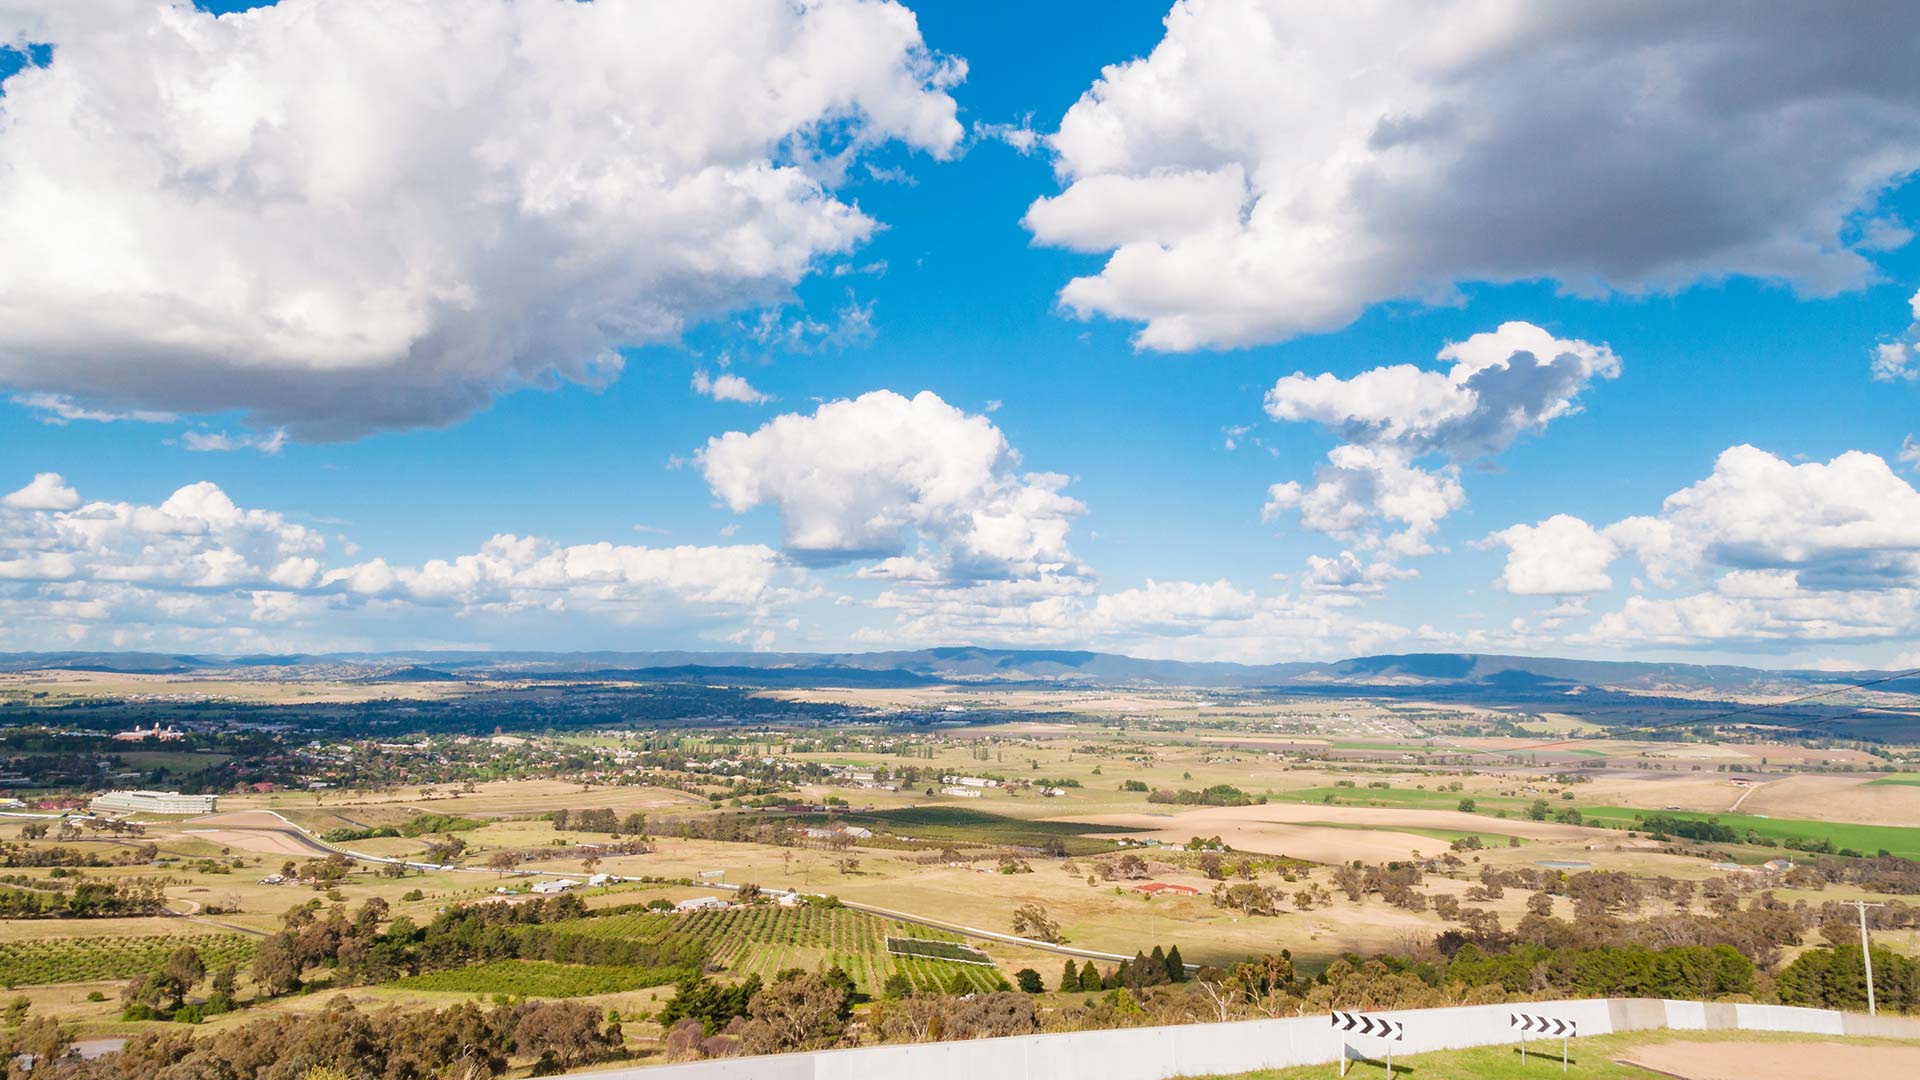 Panorama to illustrate dating in bathurst